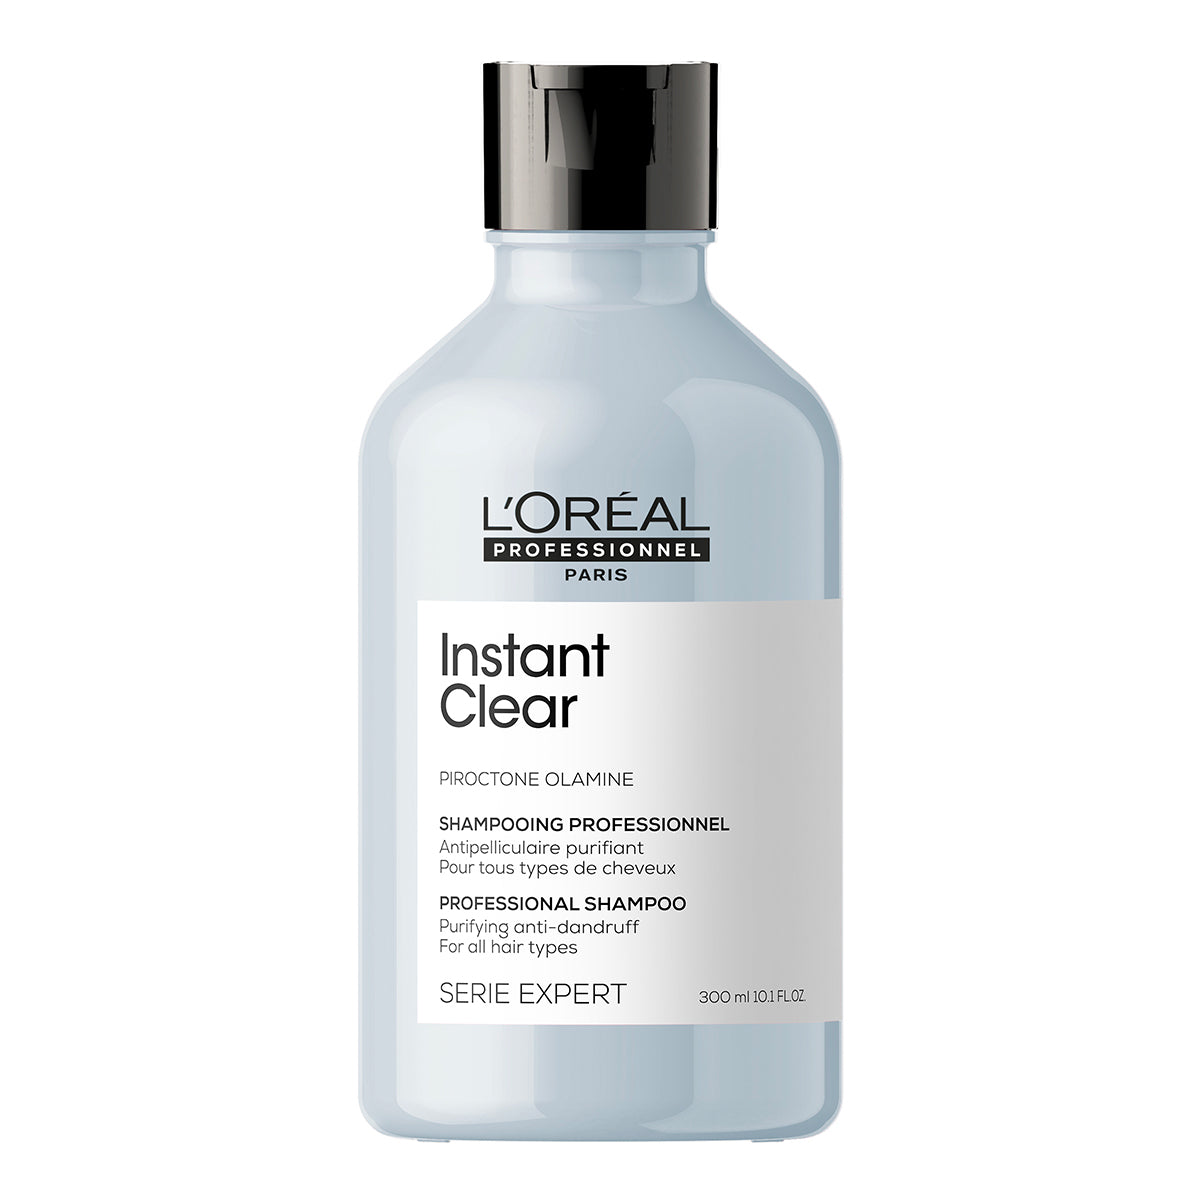 Shop The Latest Collection Of L'Oreal Professionnel Instant Clear Shampoo For All Hair Types Gel Cream Texture With Piroctone Olamine Serie Expert 300 Ml In Lebanon